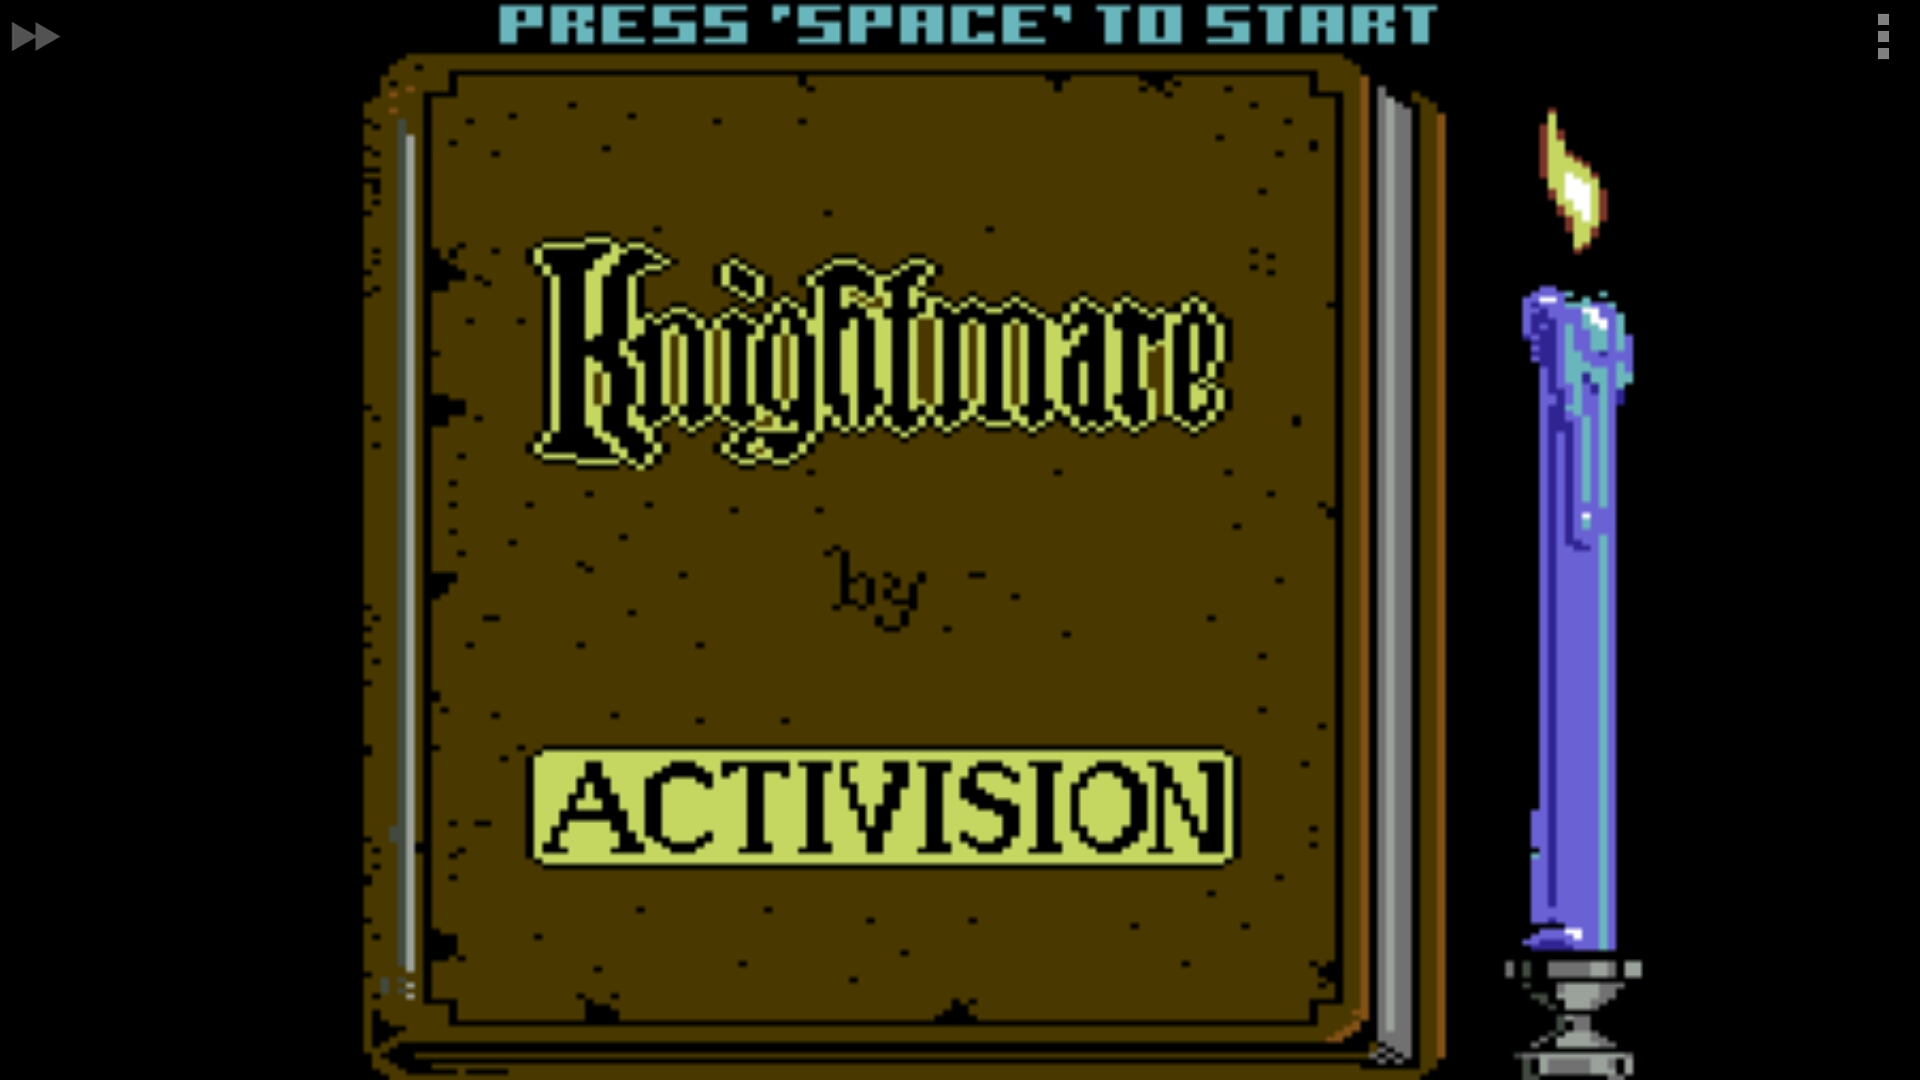 Knightmare (Activision)